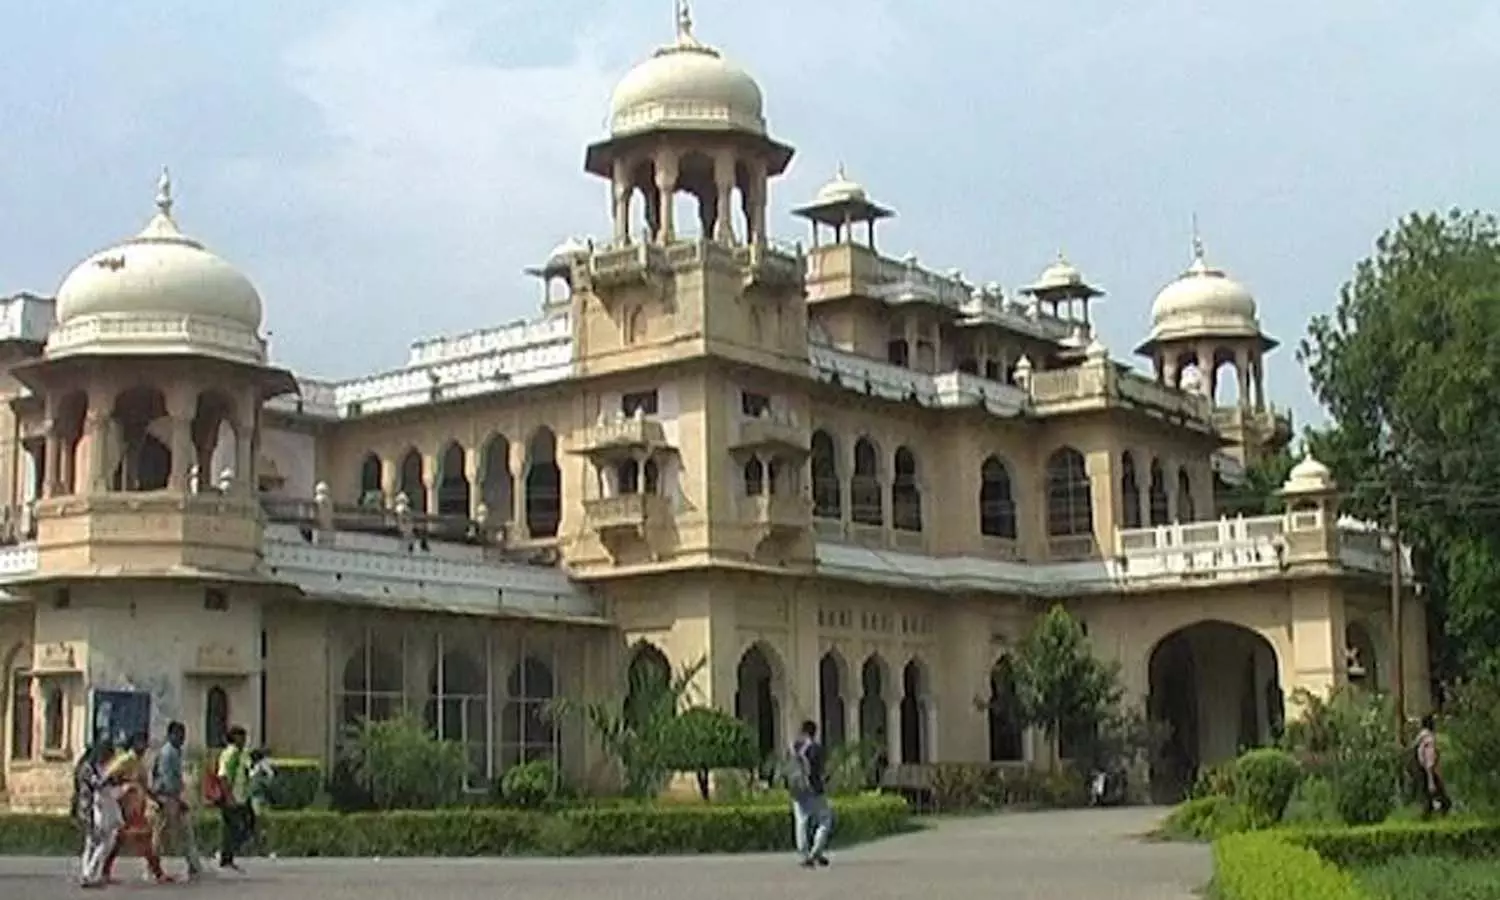 RAF personnel along with PAC deployed in Allahabad Central University campus